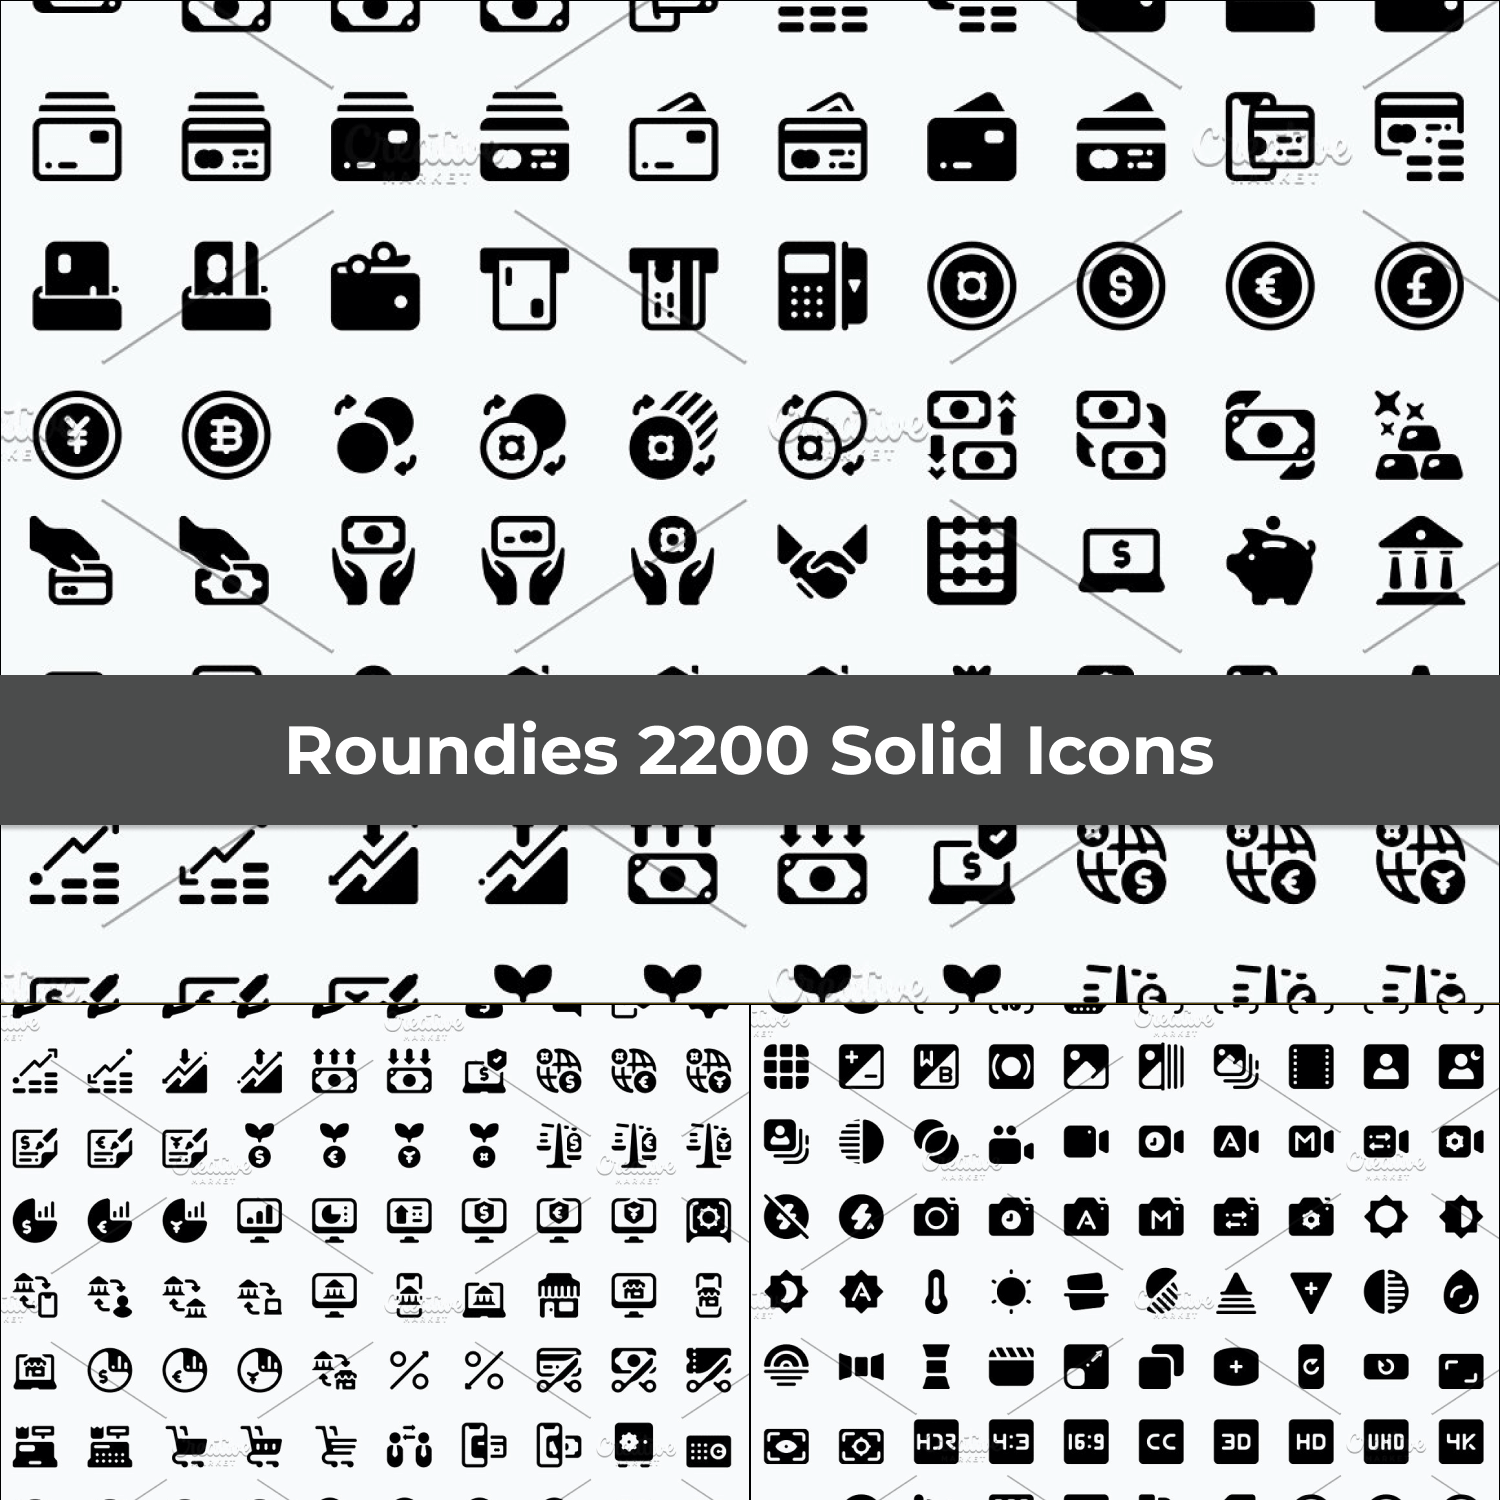 Icons of different sizes on a large white background